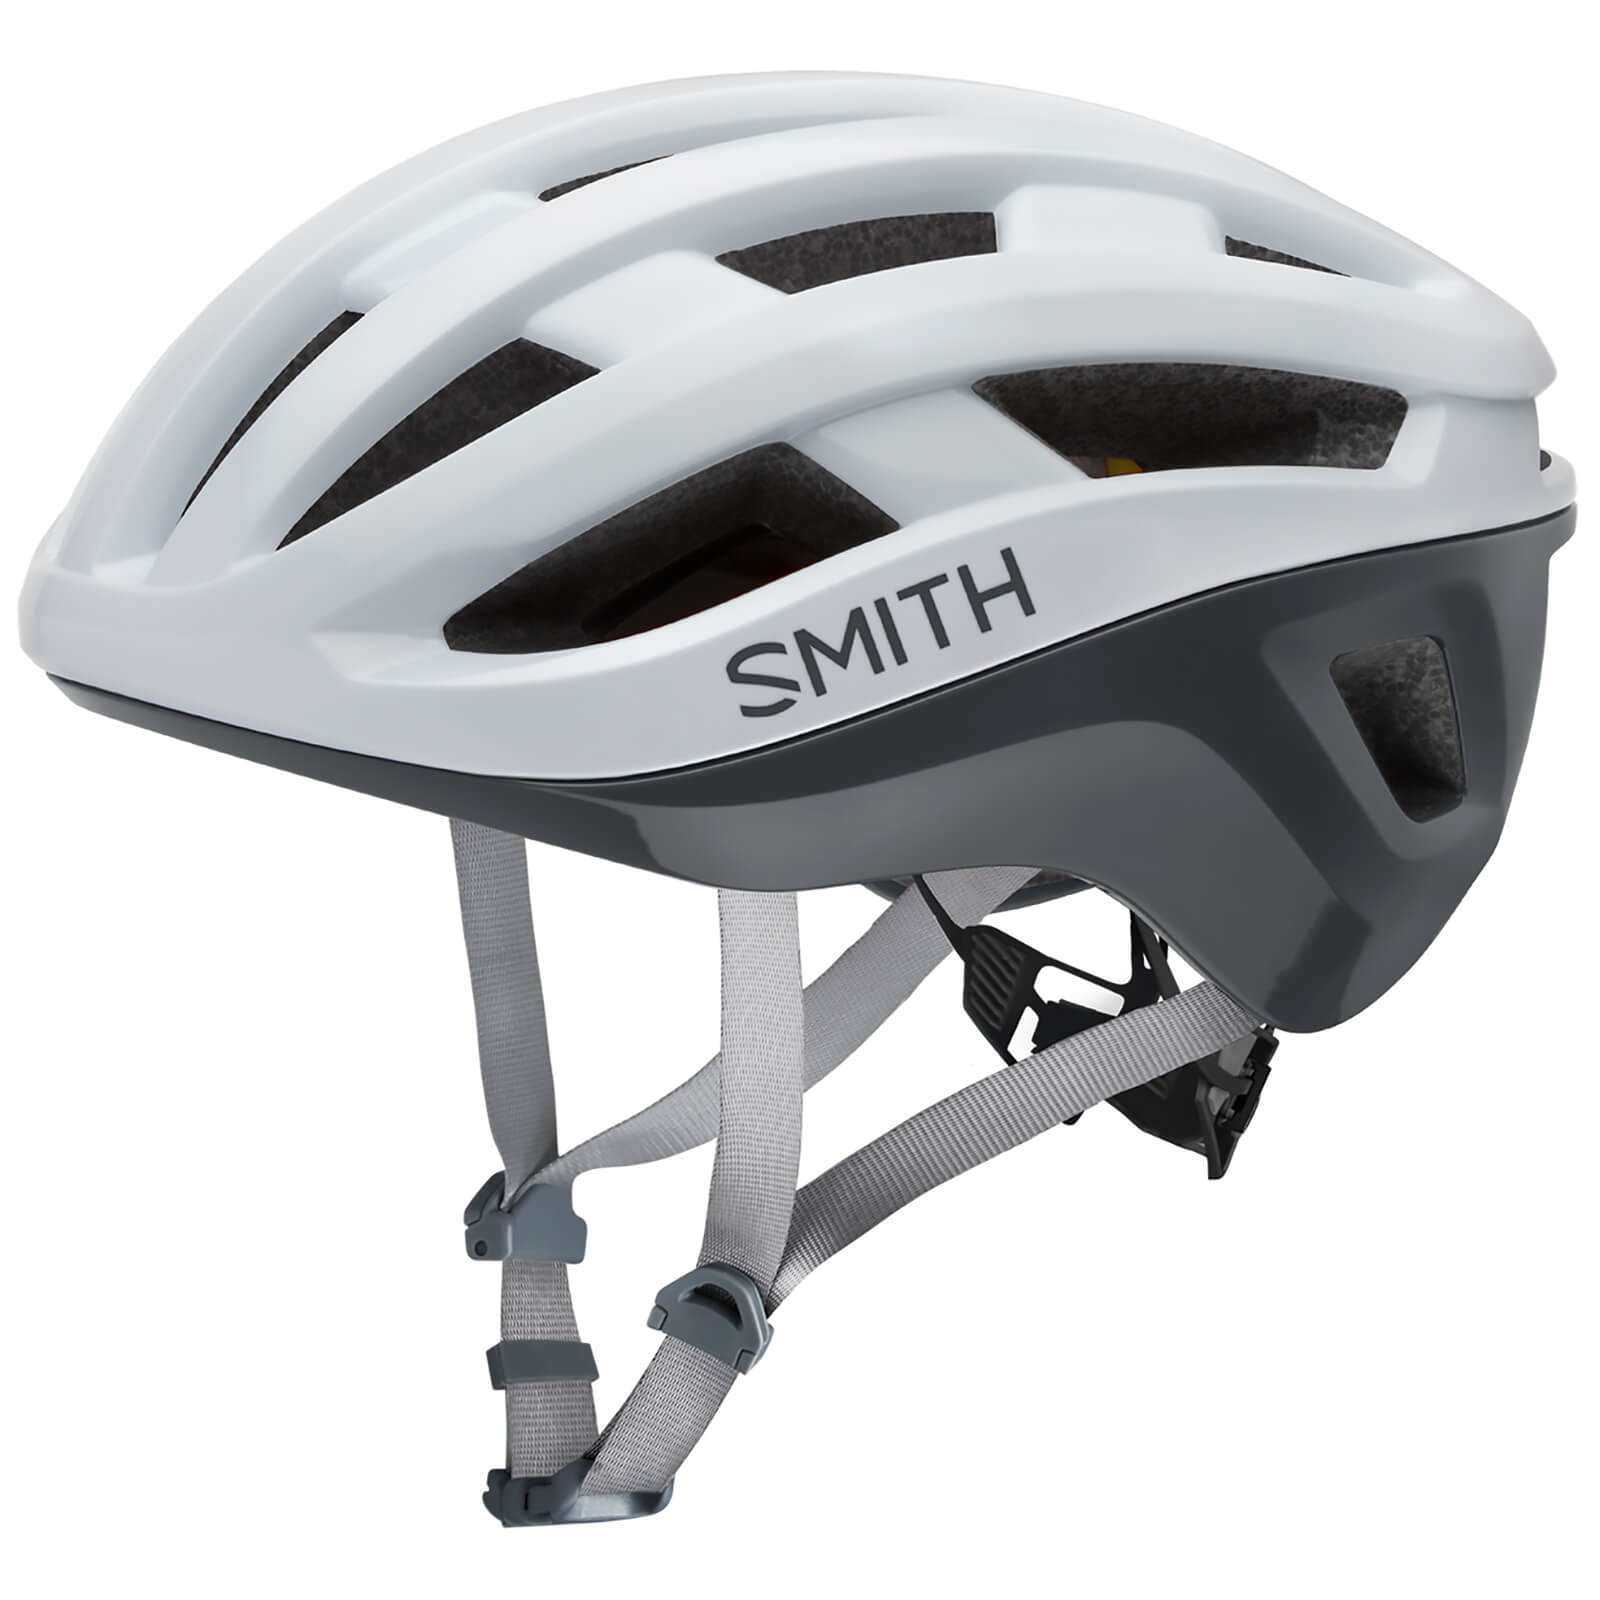 Smith Persist MIPS Road Helmet - Small - White - Cement